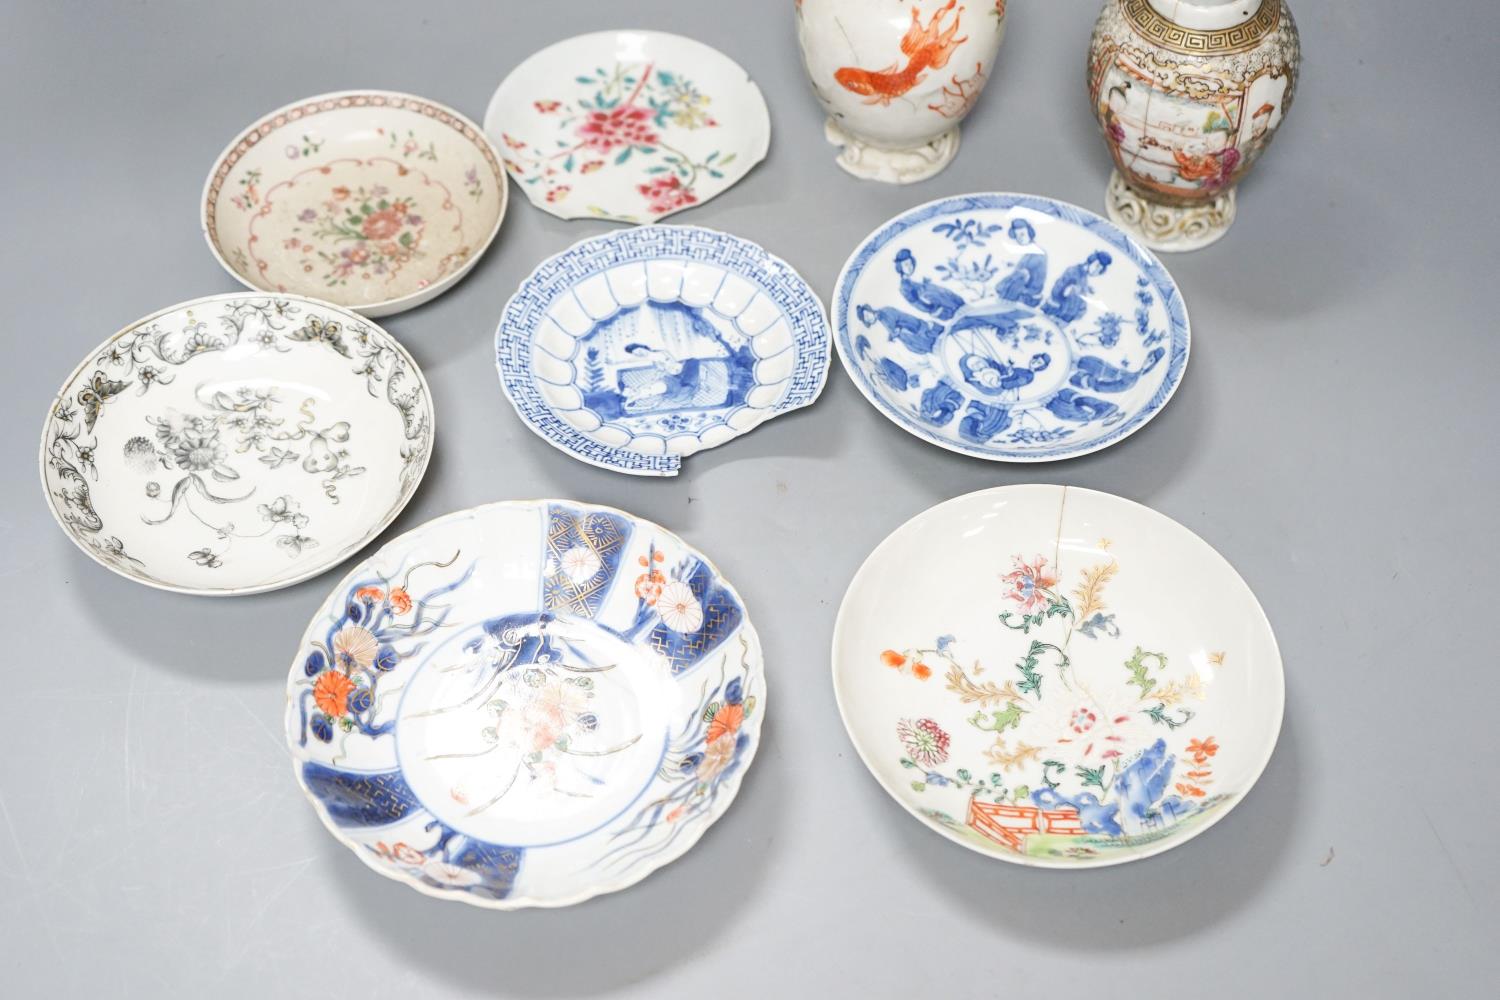 Assorted Chinese porcelain vases and tea wares, Qing dynasty or later - Image 2 of 7